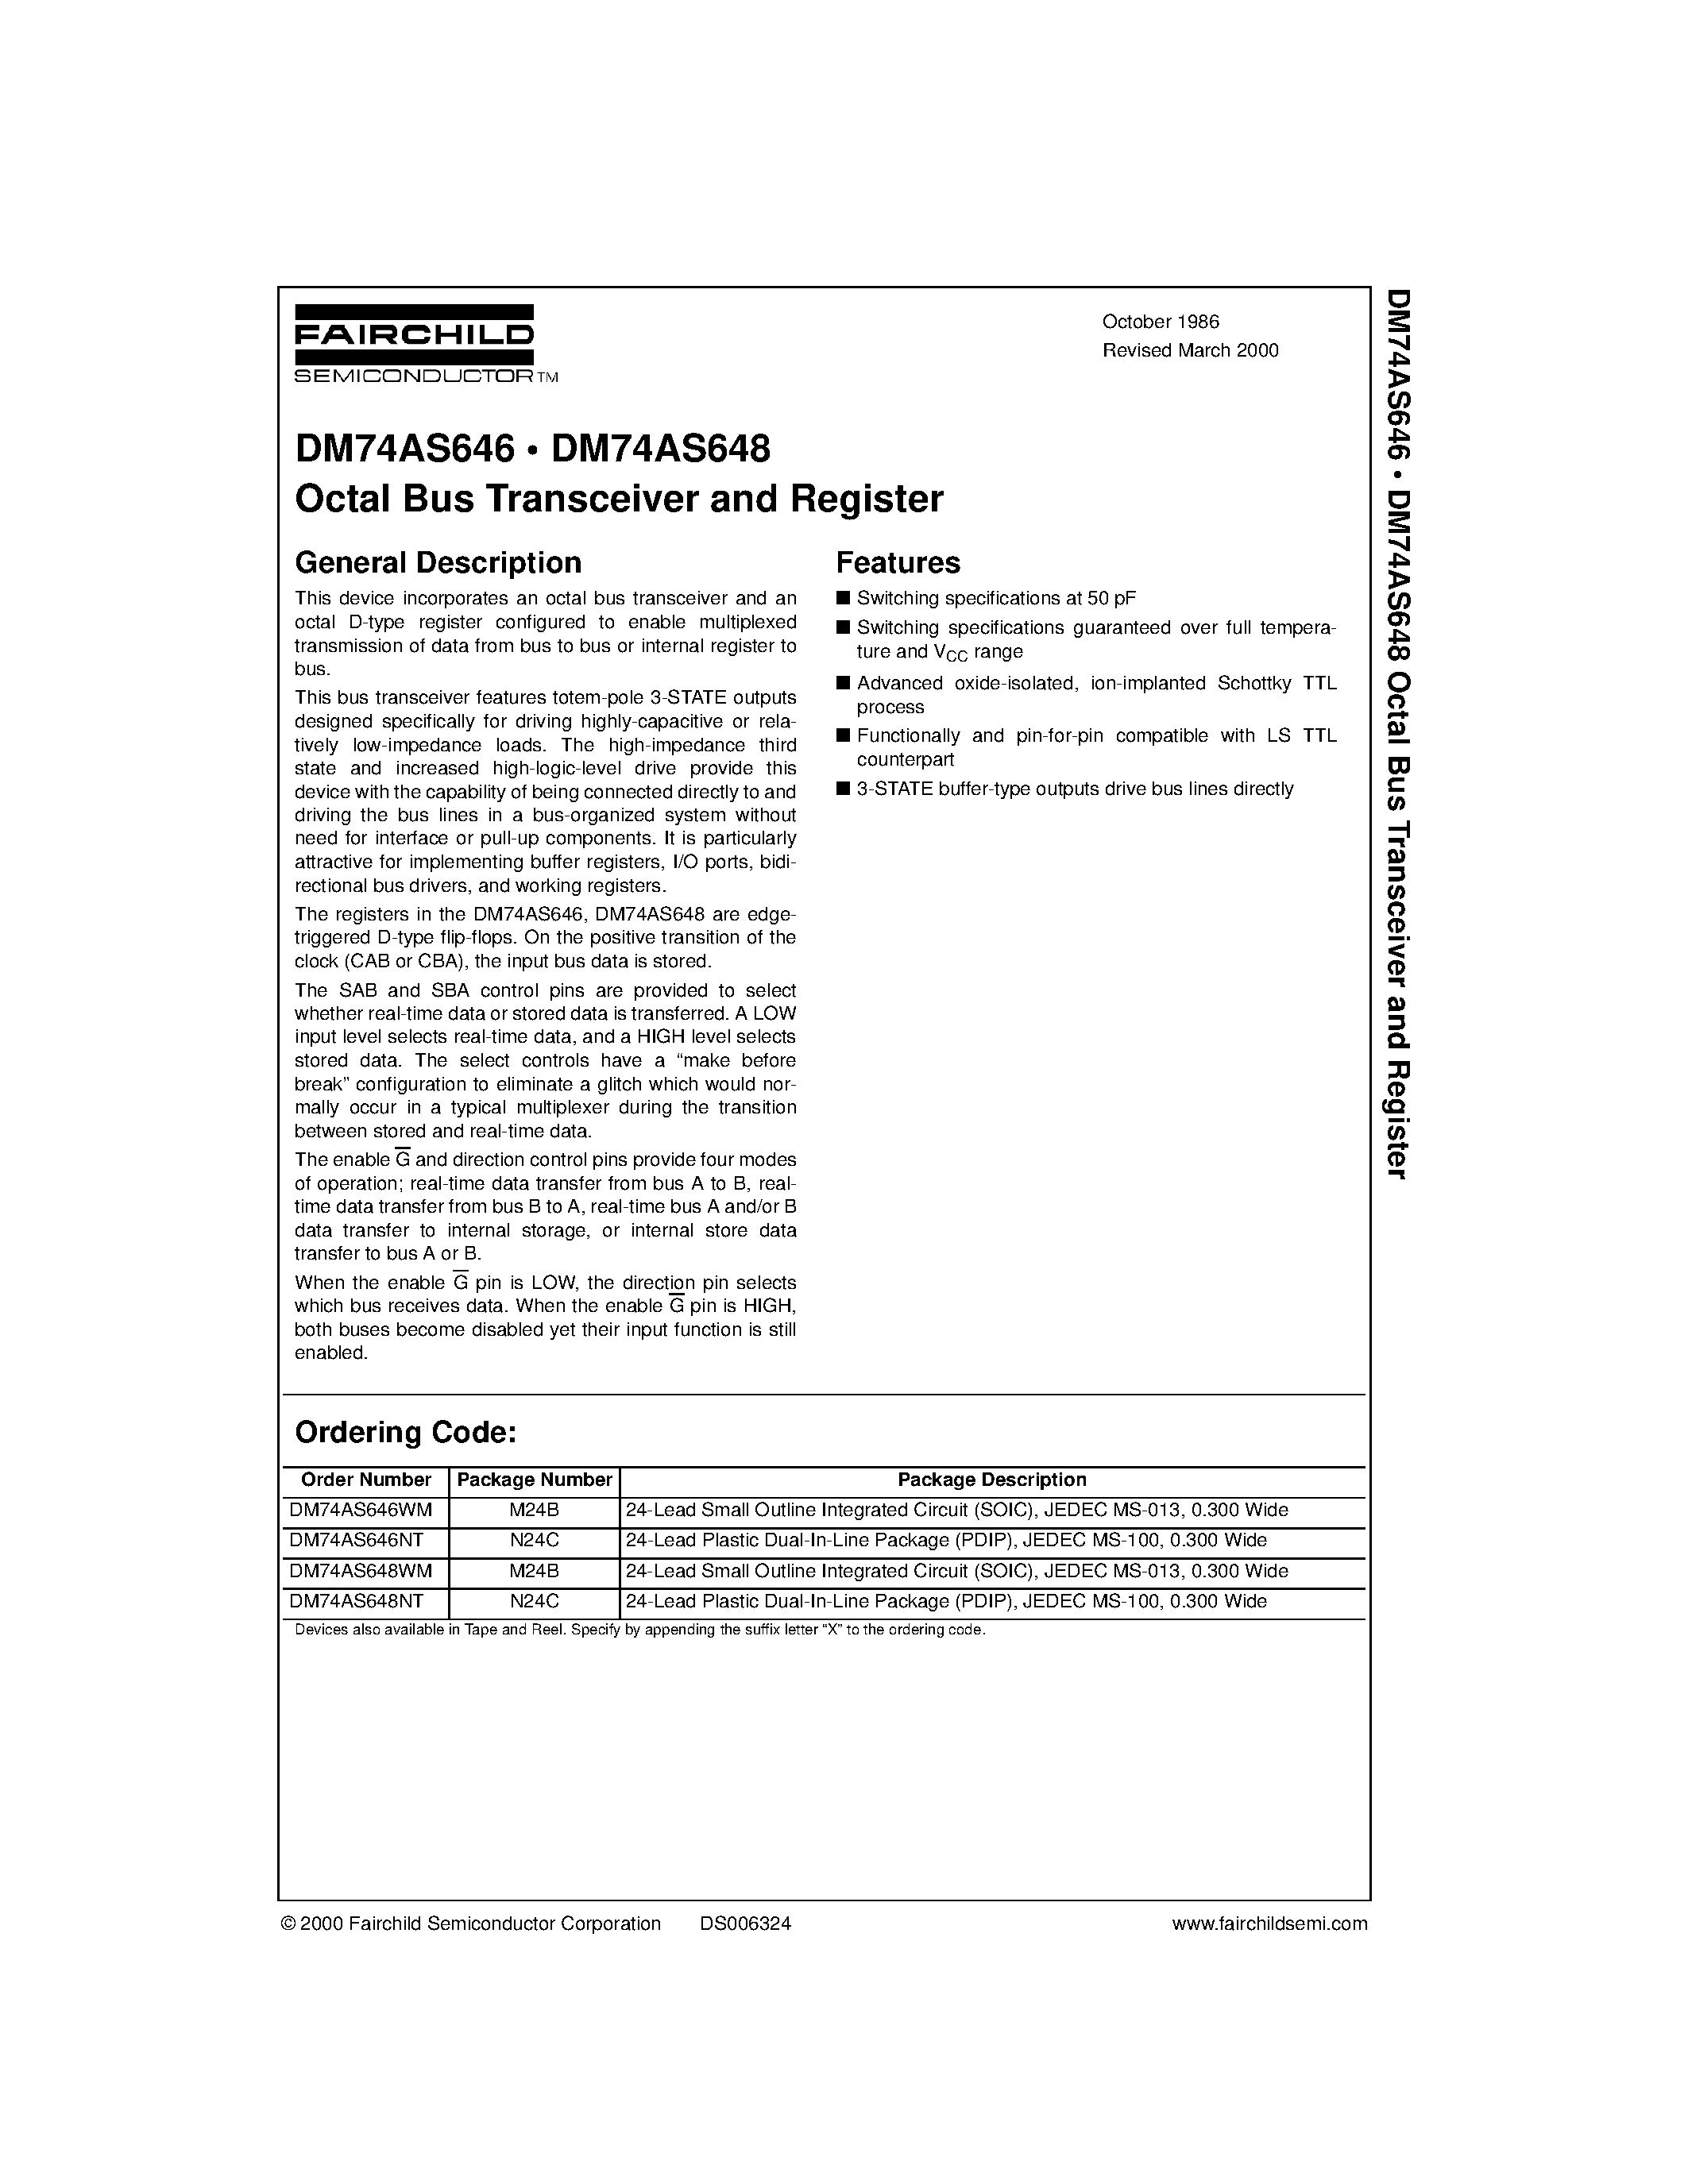 Datasheet DM74AS646NT - Octal Bus Transceiver and Register page 1